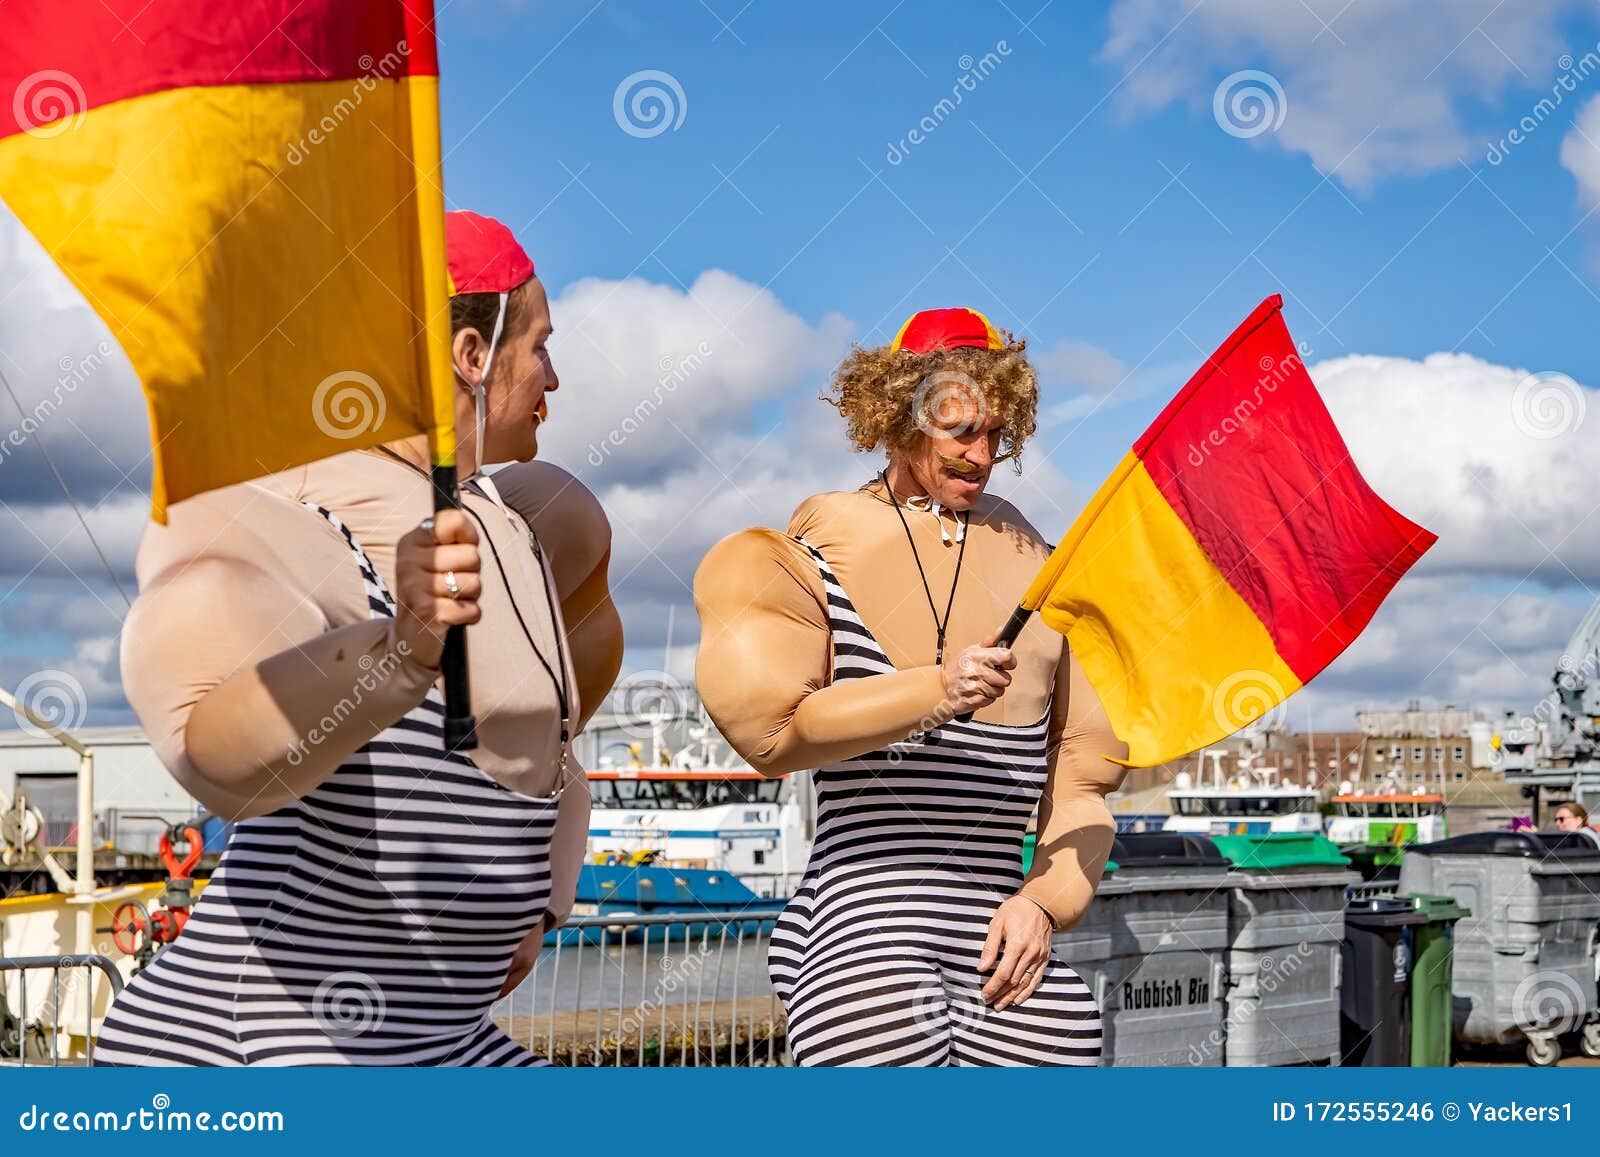 A Couple Dressed As Novelty Lifeguards Waving Flags At The Annual Maritime Festival Editorial Photo Image Of Beach Great